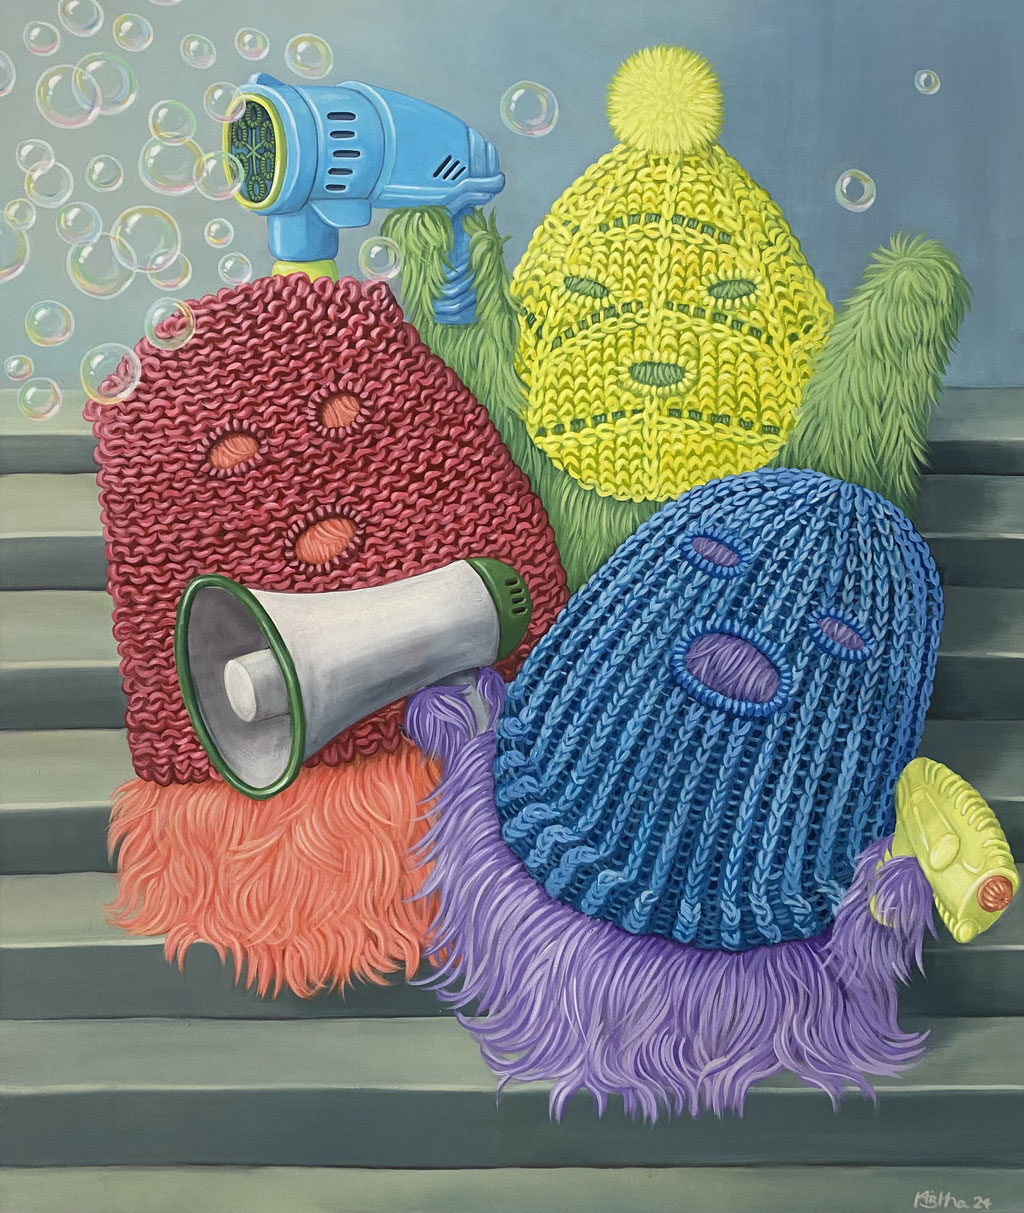 Make some noise, sisters!, 130 x 110 cm, Eggtempera on Canvas